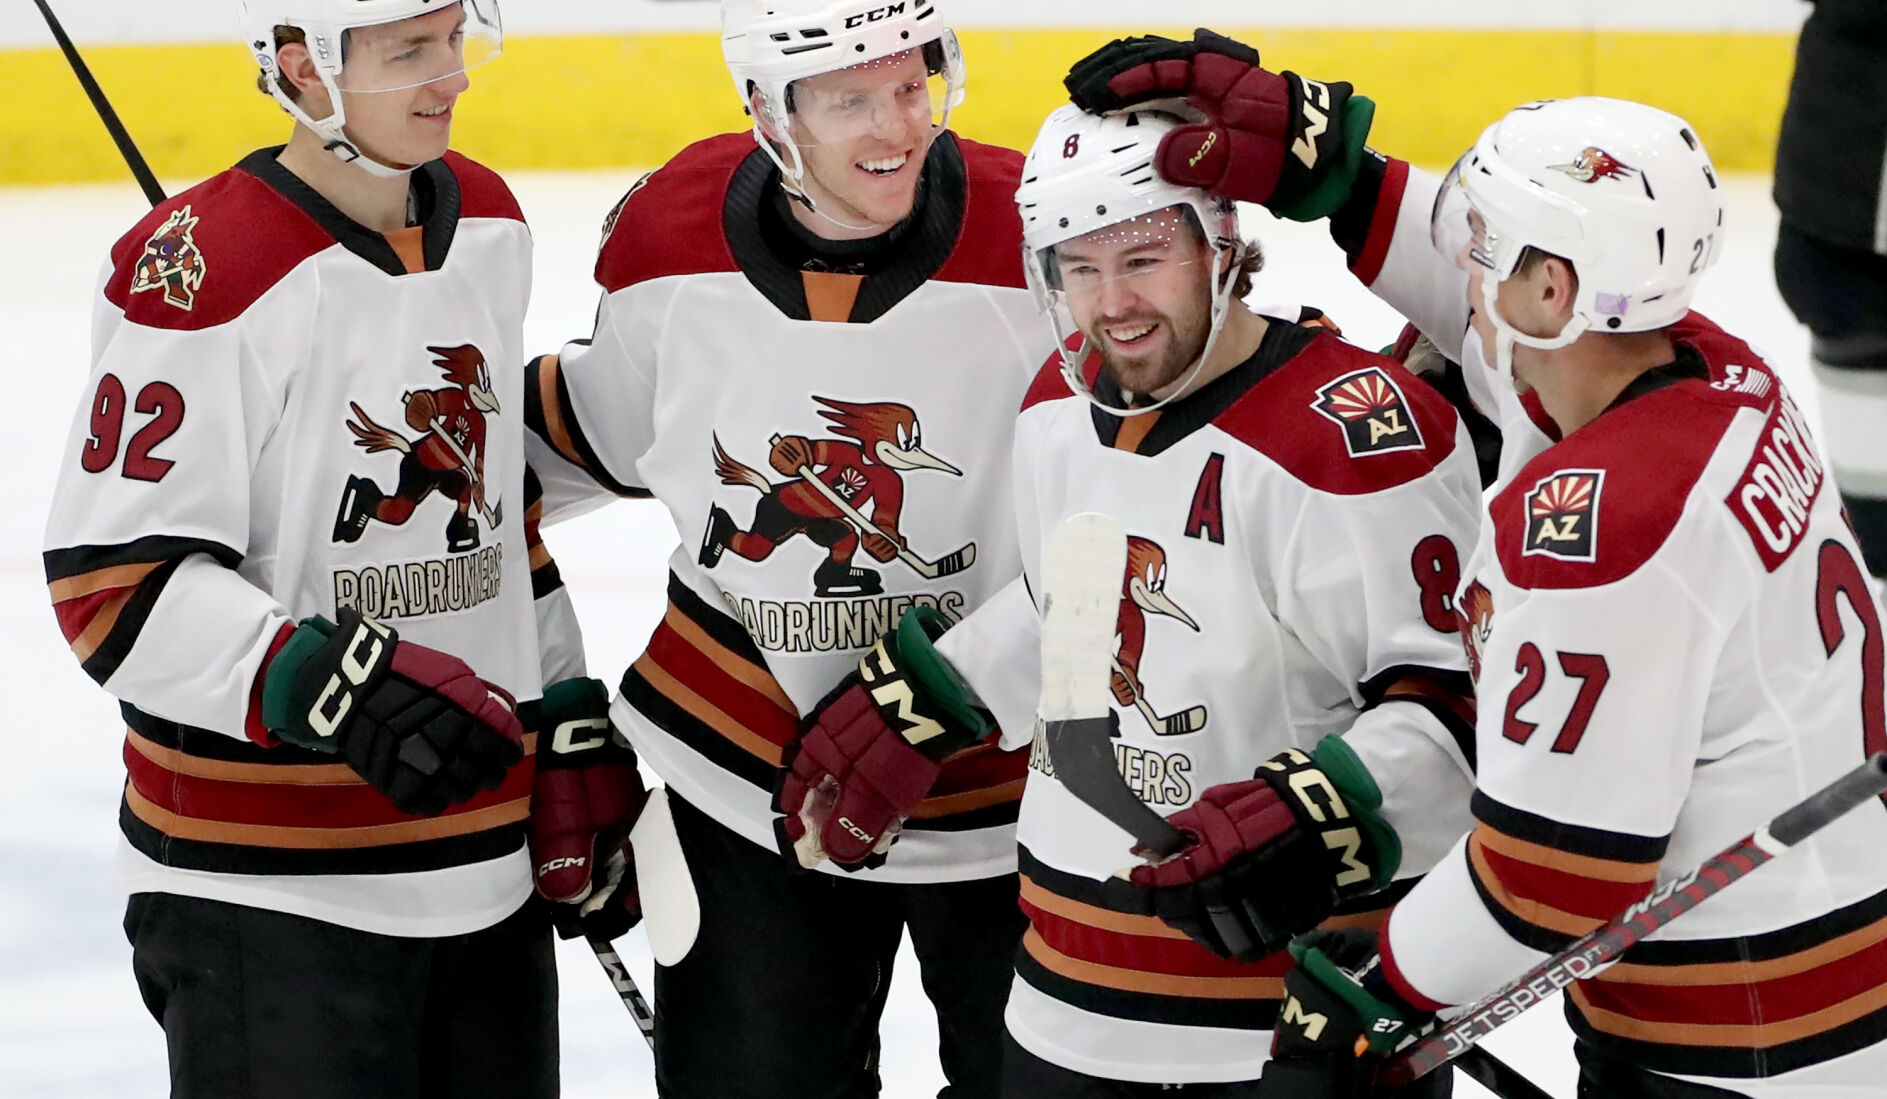 Roadrunners Michael Carcone comes full circle with first AHL All-Star appearance